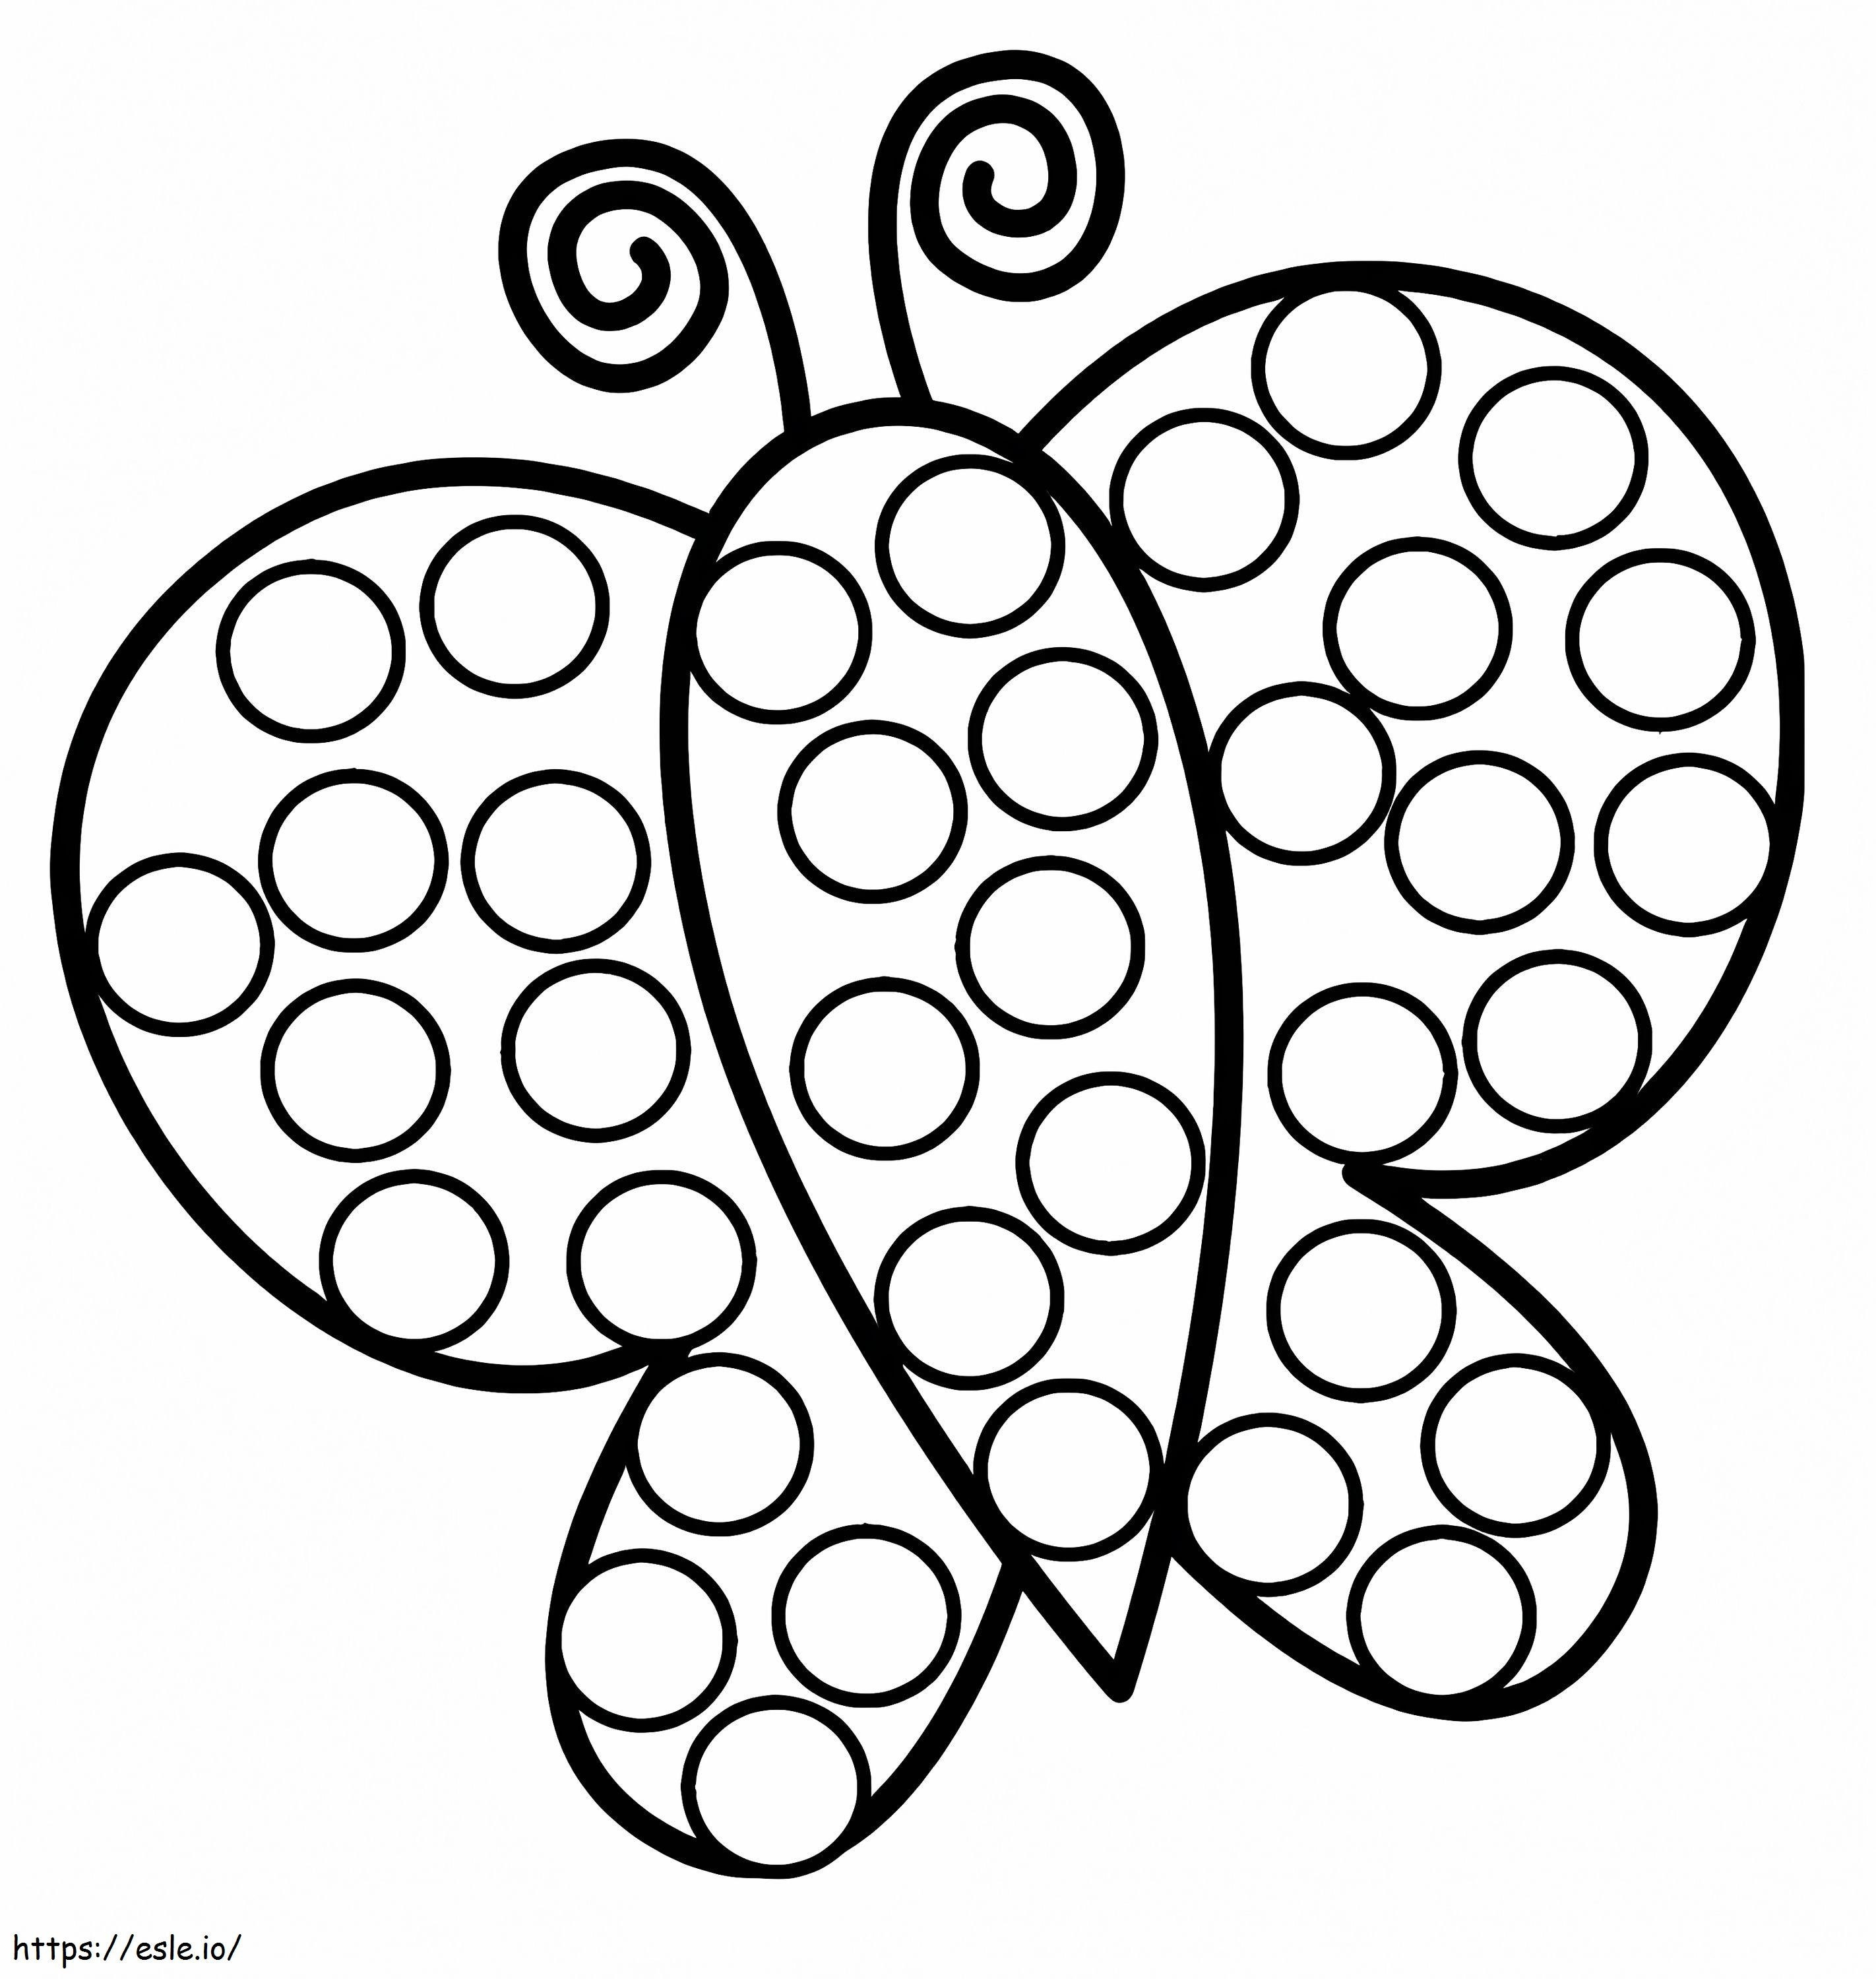 Butterfly Dot Marker coloring page